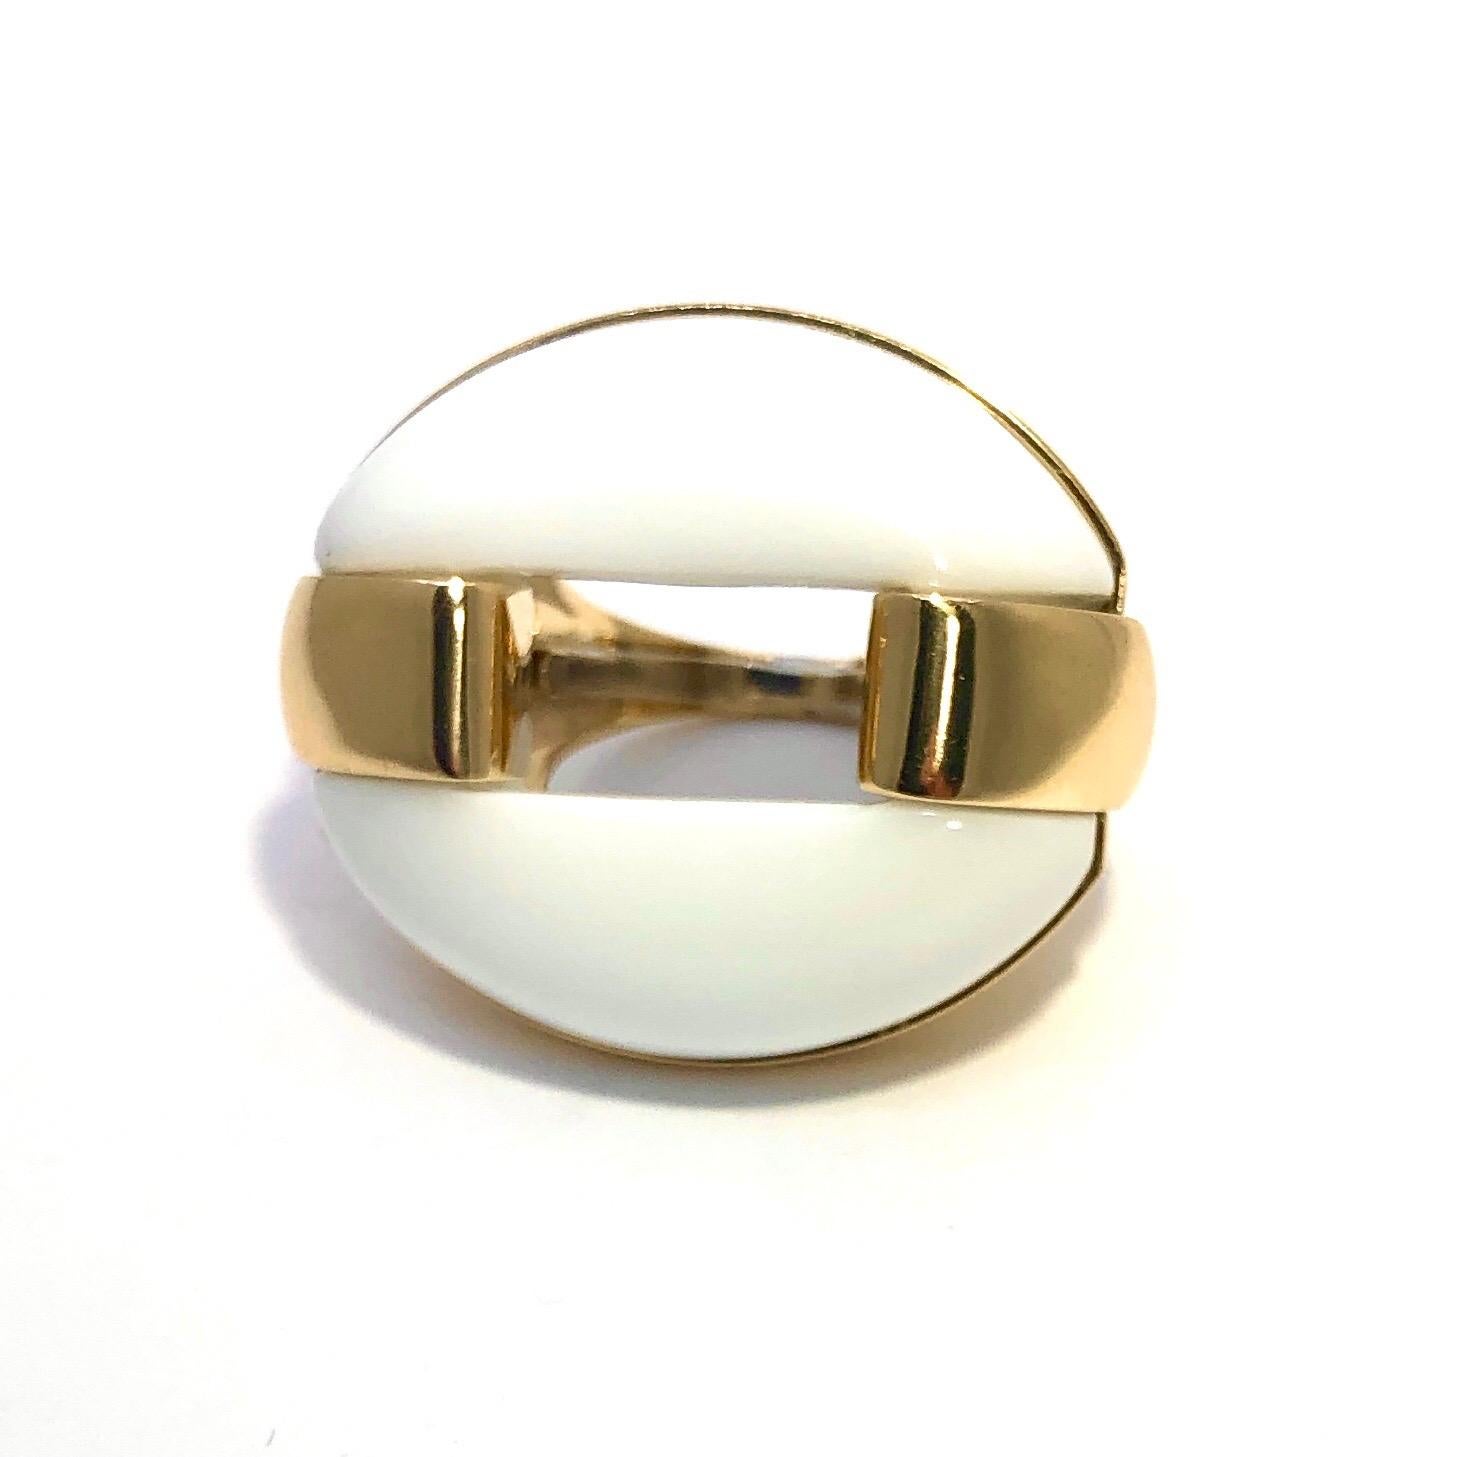 This striking and impactful ring is crafted from 18k yellow gold atop which sits a white agate oval,  measuring 1 3/16 inches by 1 1/16 inches. The stylish ring shoulders embrace the white agate oval on each side creating a visually stunning effect.